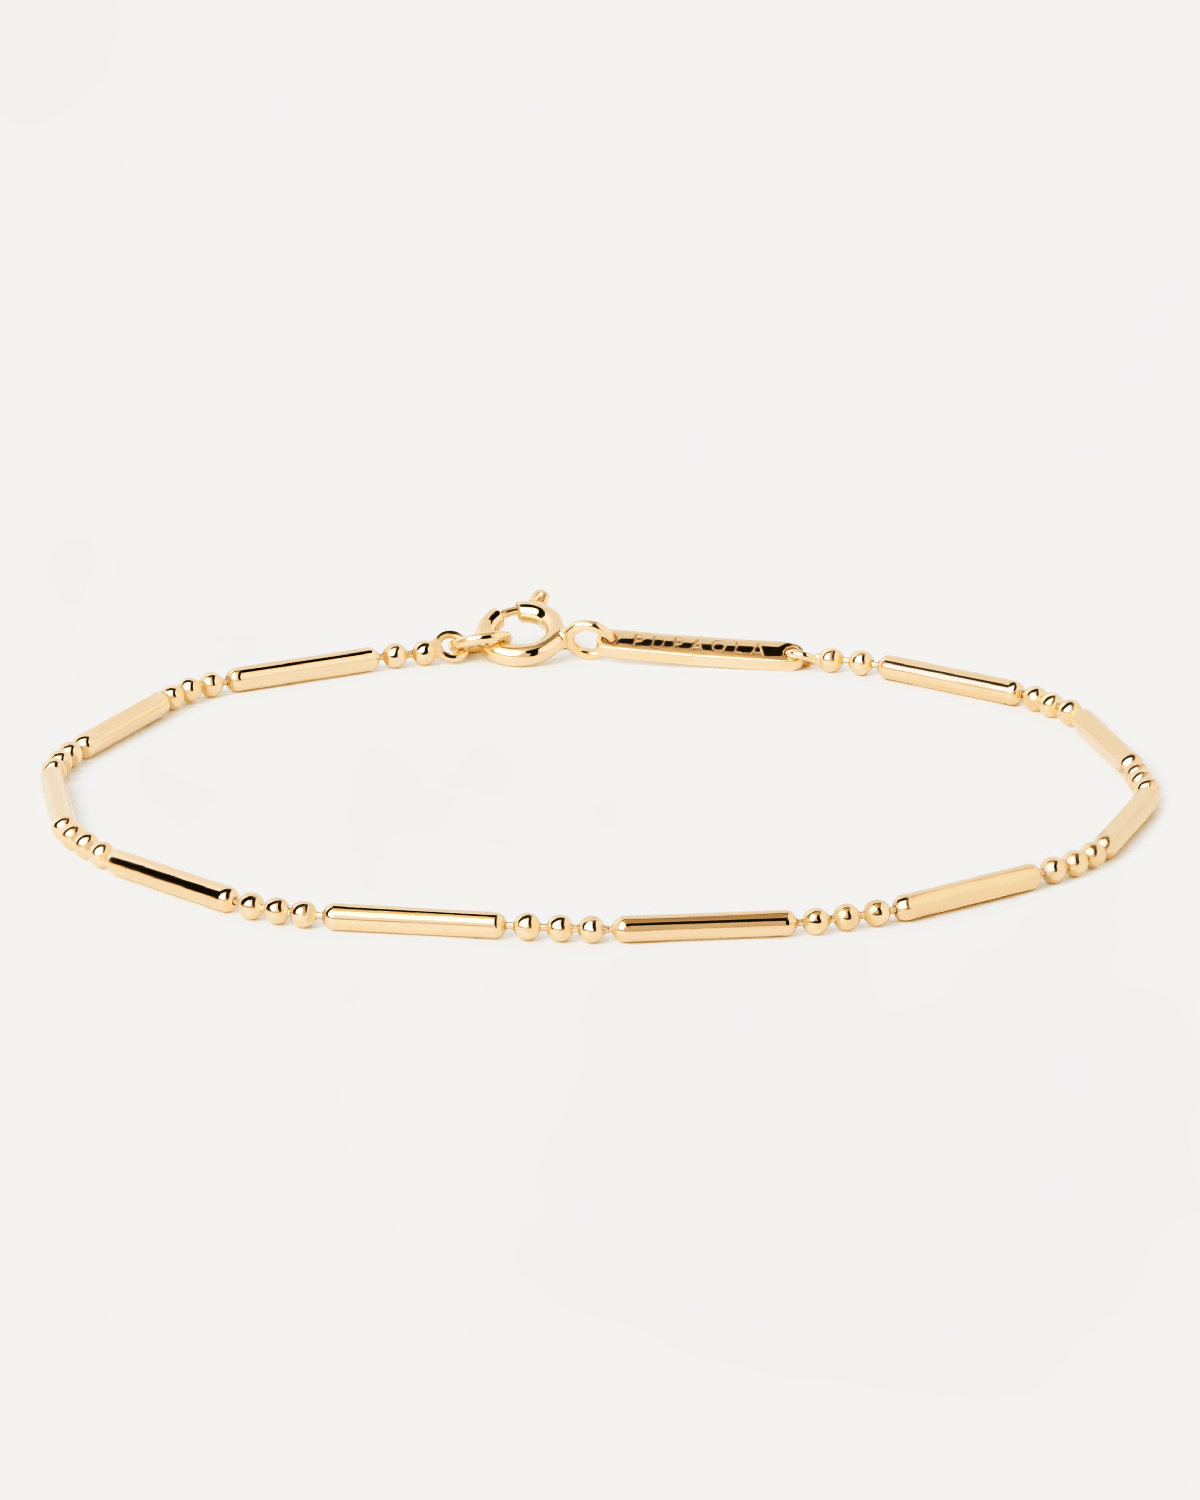 Ball and bar textured bracelet in gold-plated silver | Valeria Bracelet ...